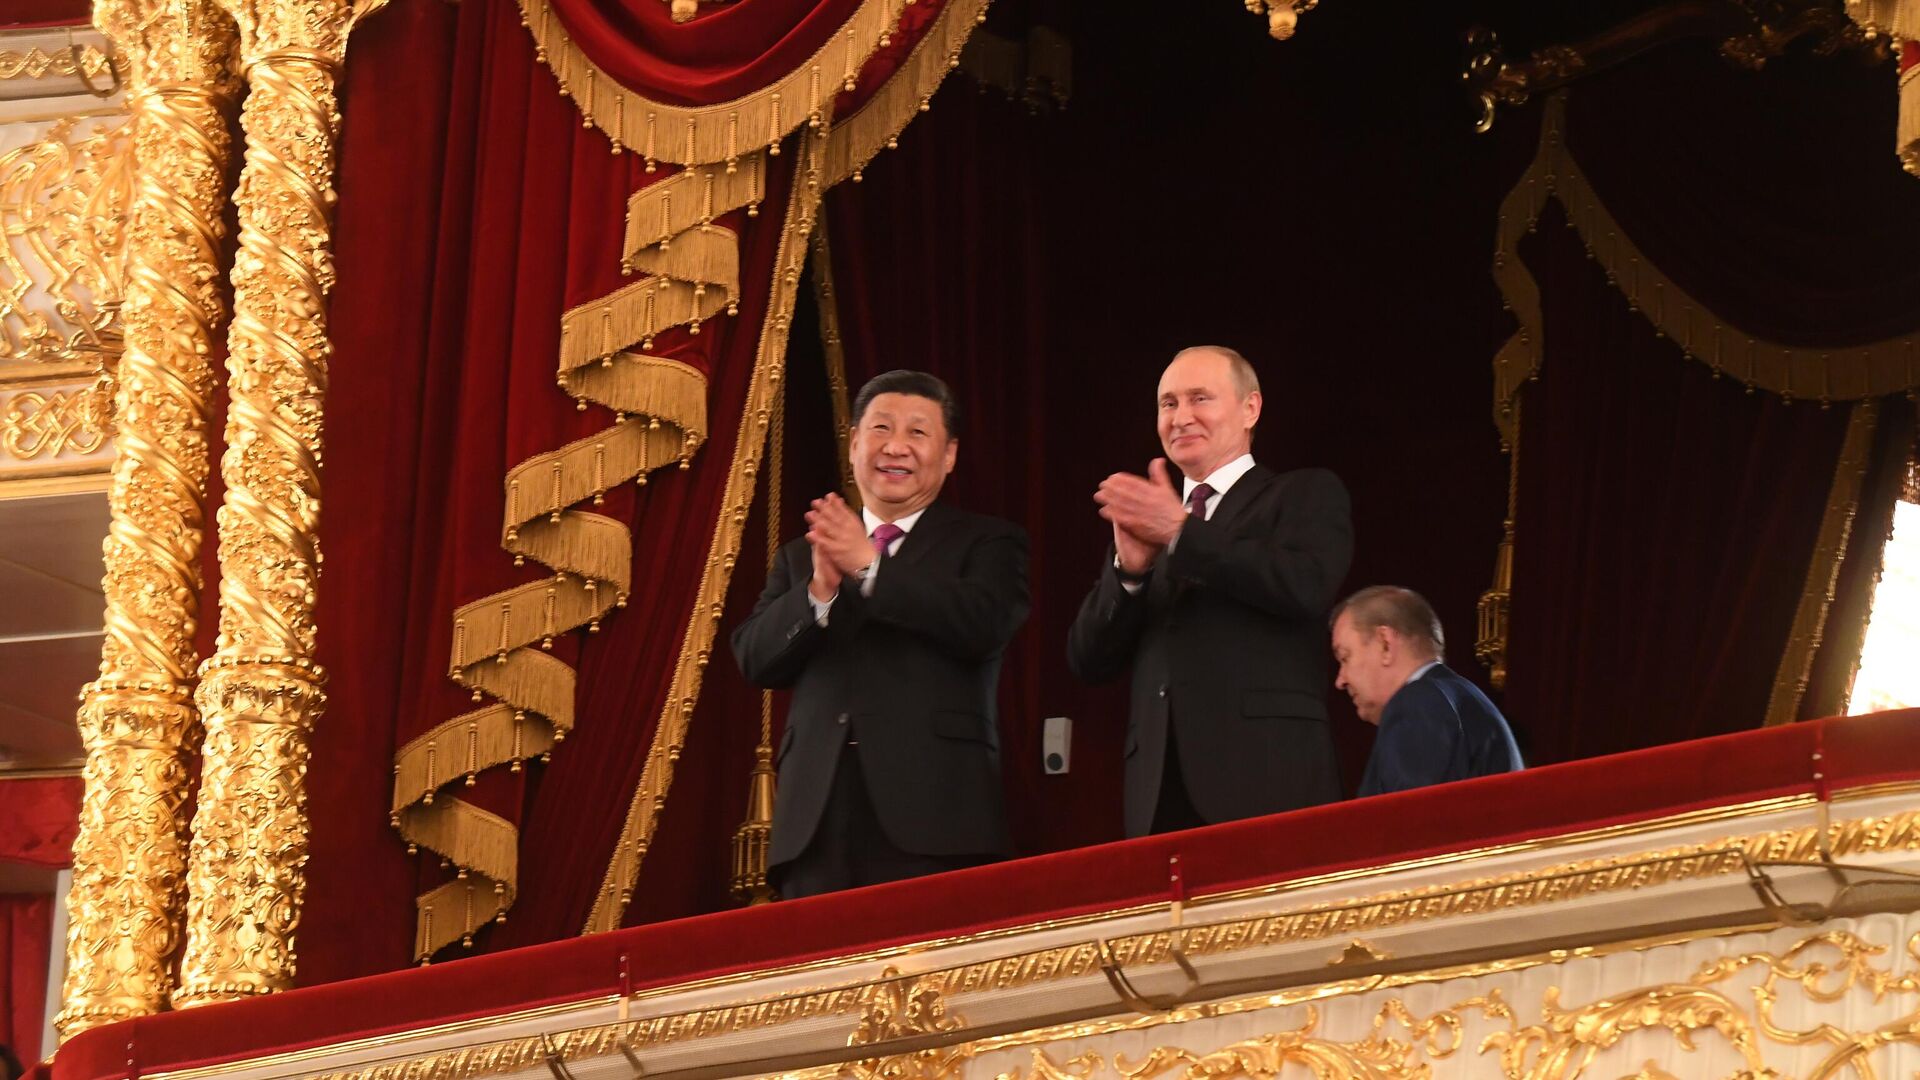 Russian President Vladimir Putin and Chinese President Xi Jinping mark the 70th anniversary of diplomatic relations between the USSR and China at the Bolshoi Theater in Moscow. June 2019. - Sputnik International, 1920, 20.03.2023